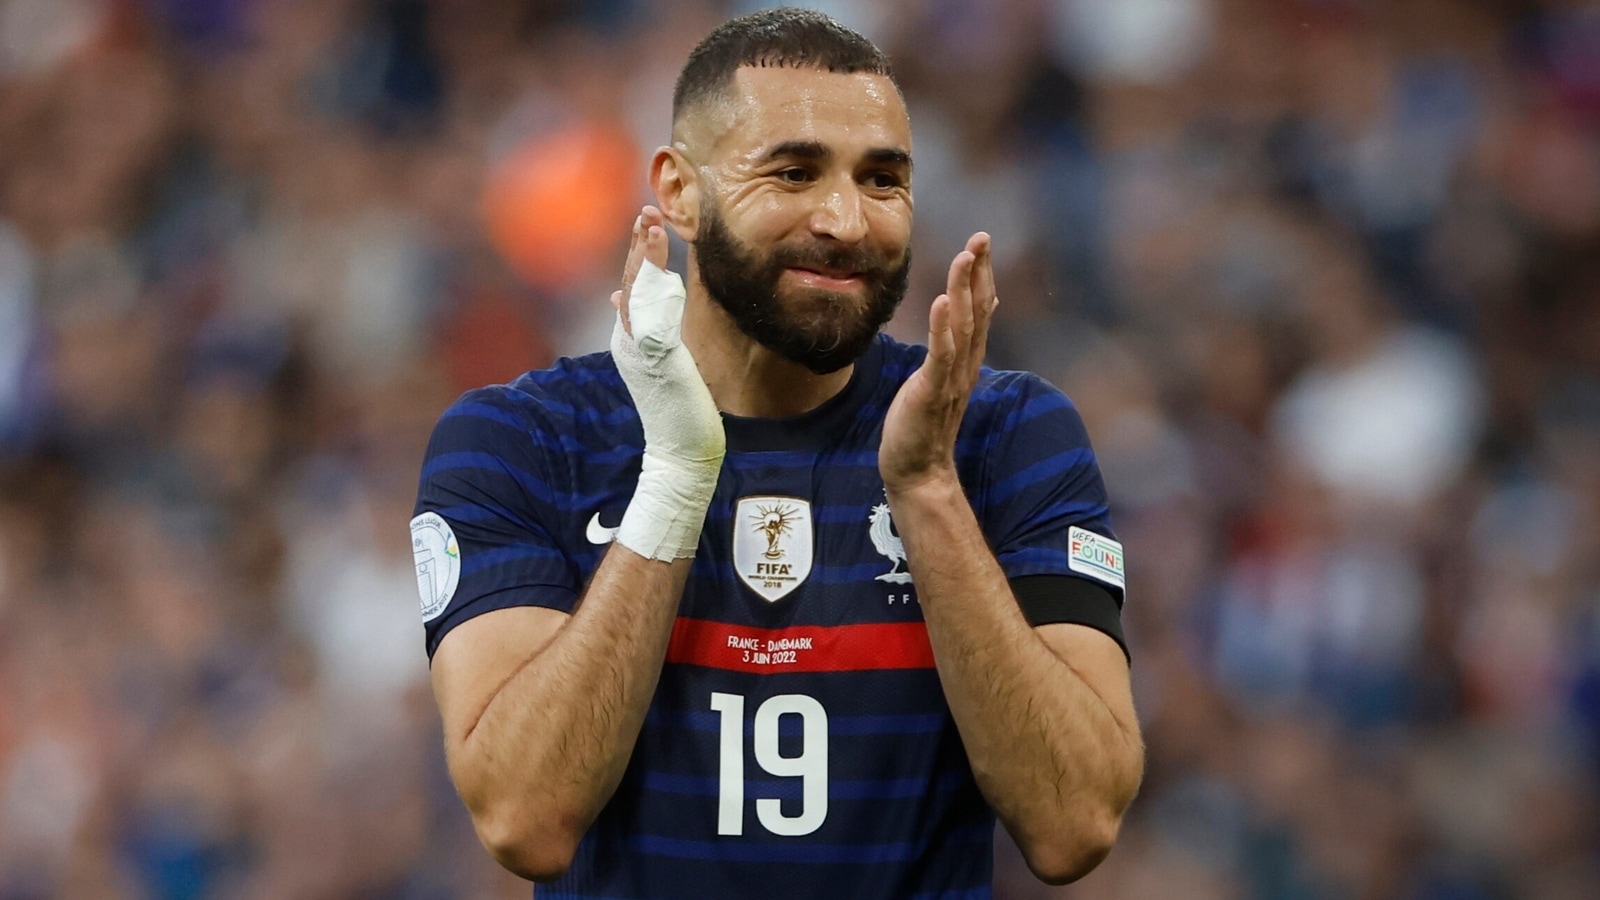 Ballon D'or winner Benzema 'ends' France career after FIFA World Cup